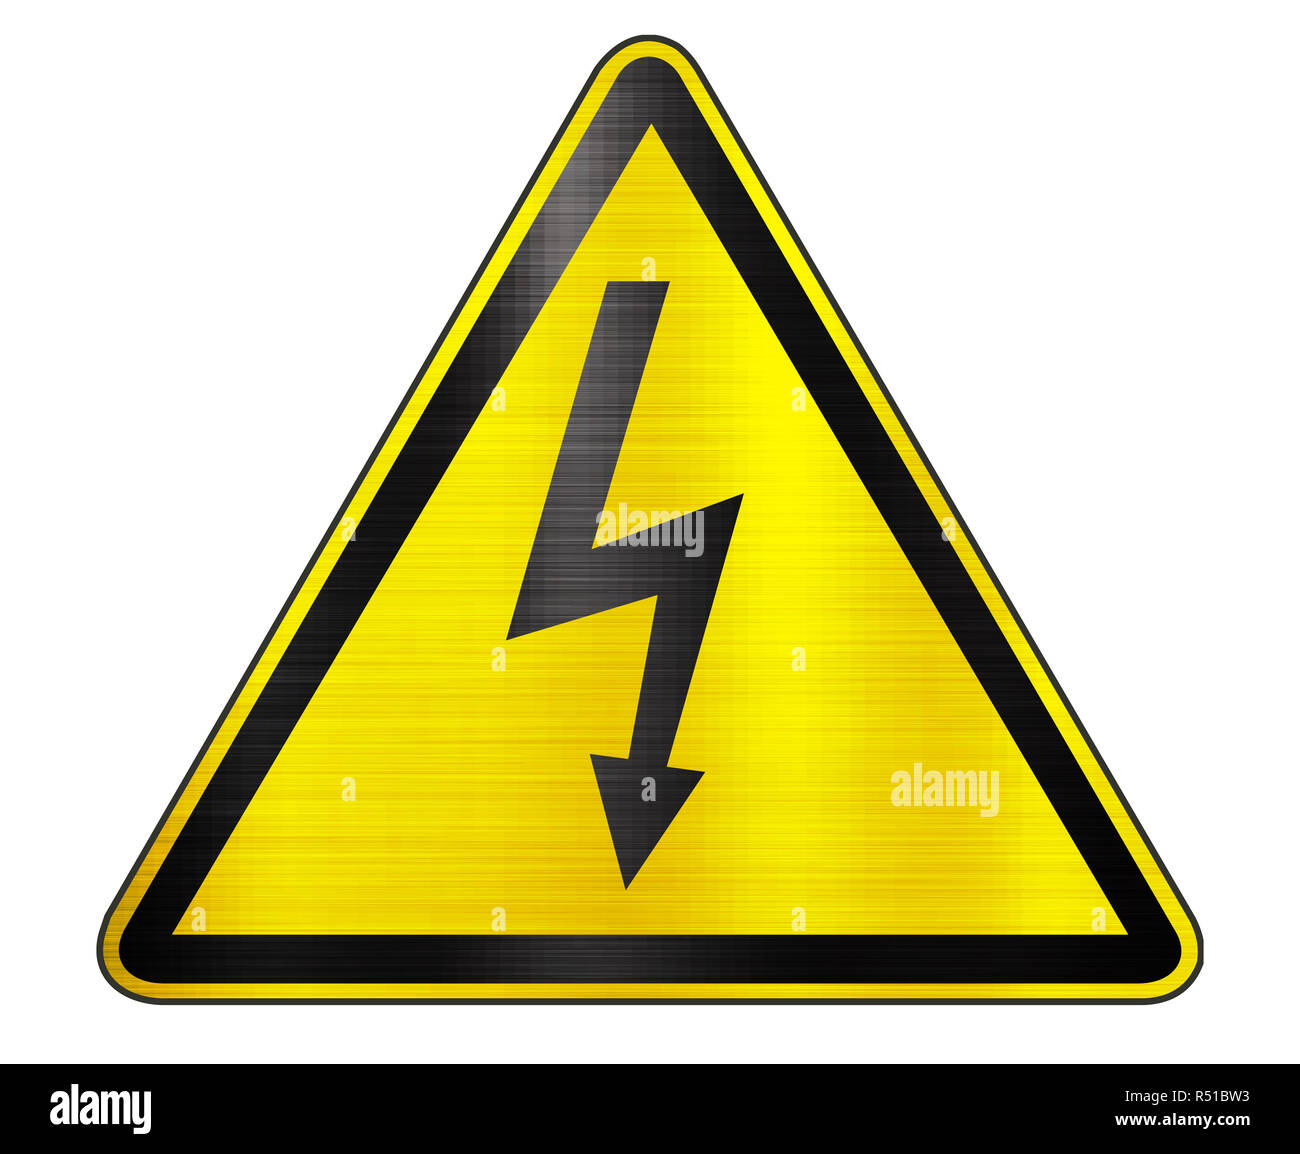 danger  electricity voltage high sign Stock Photo